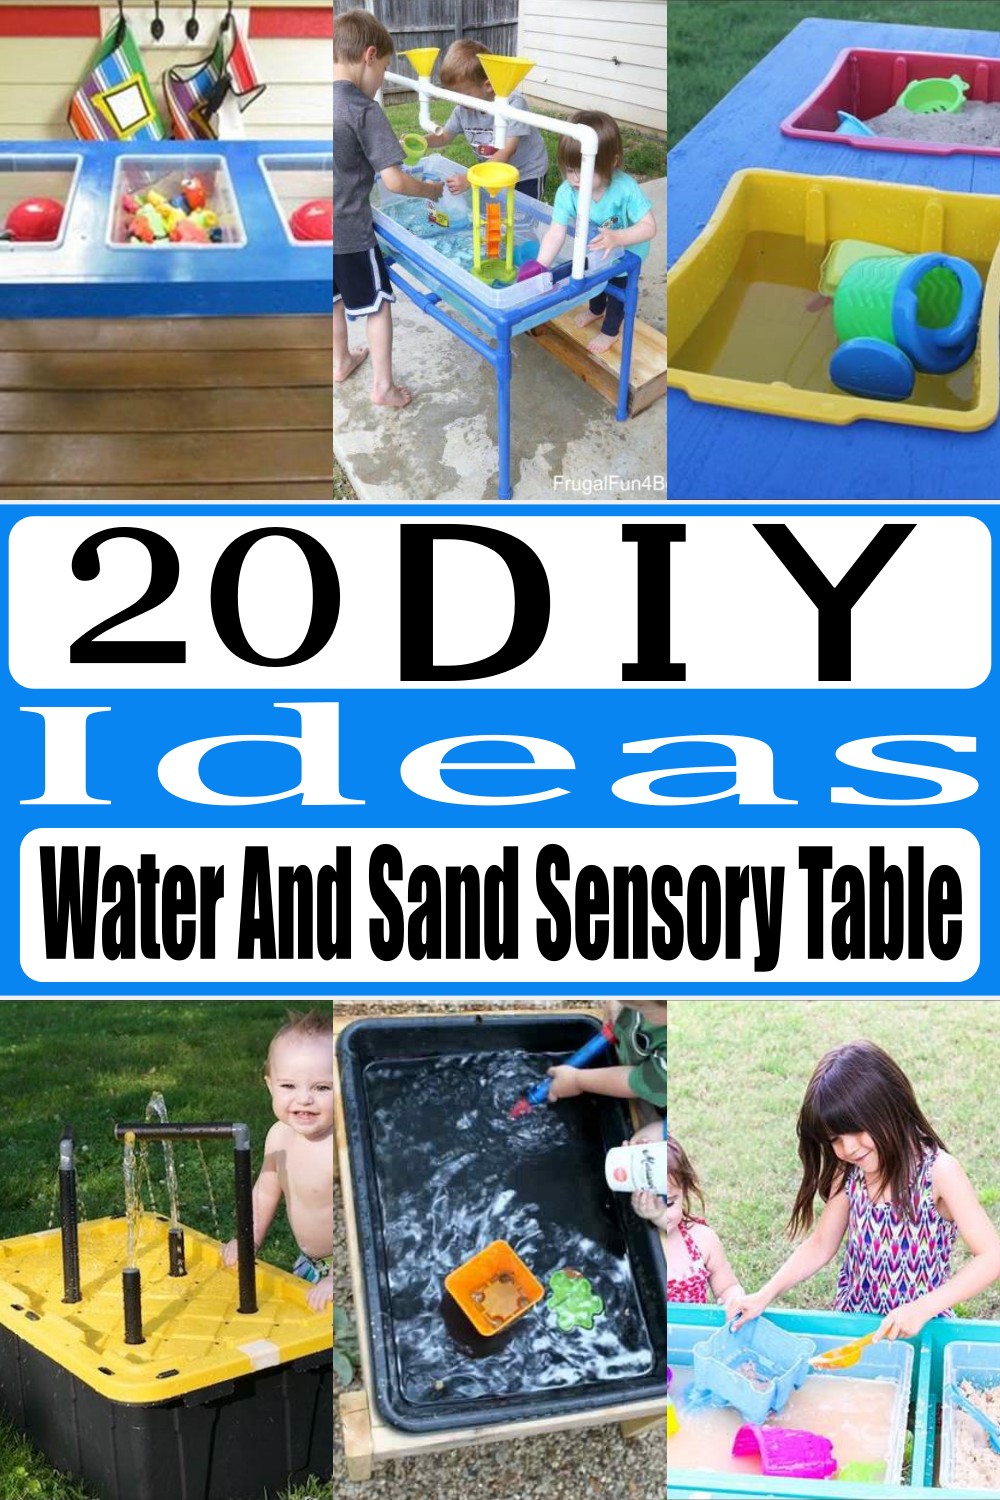 Water And Sand Sensory Table